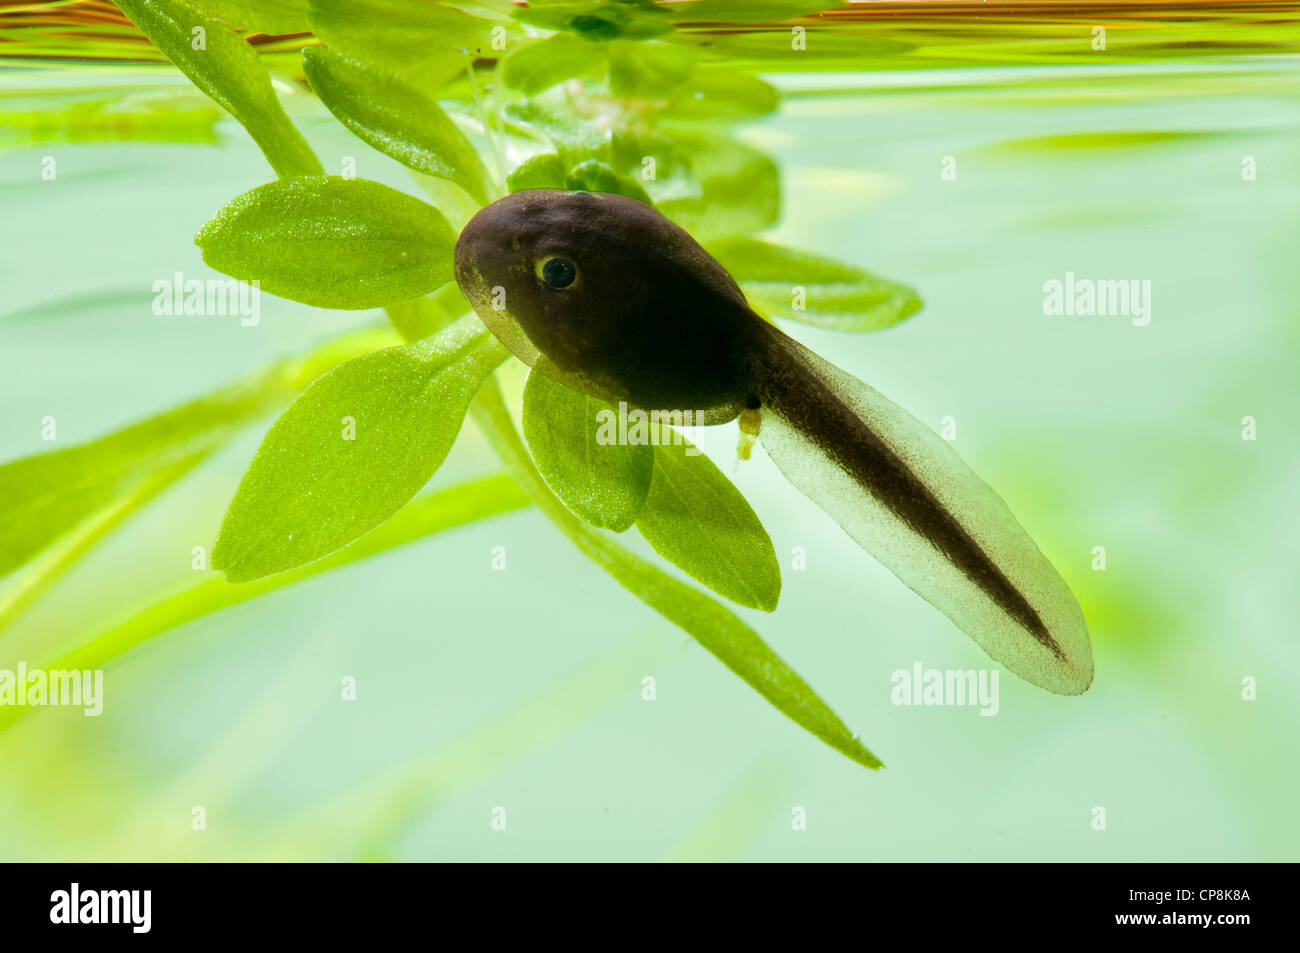 How To Clean A Green Pool With Tadpoles  